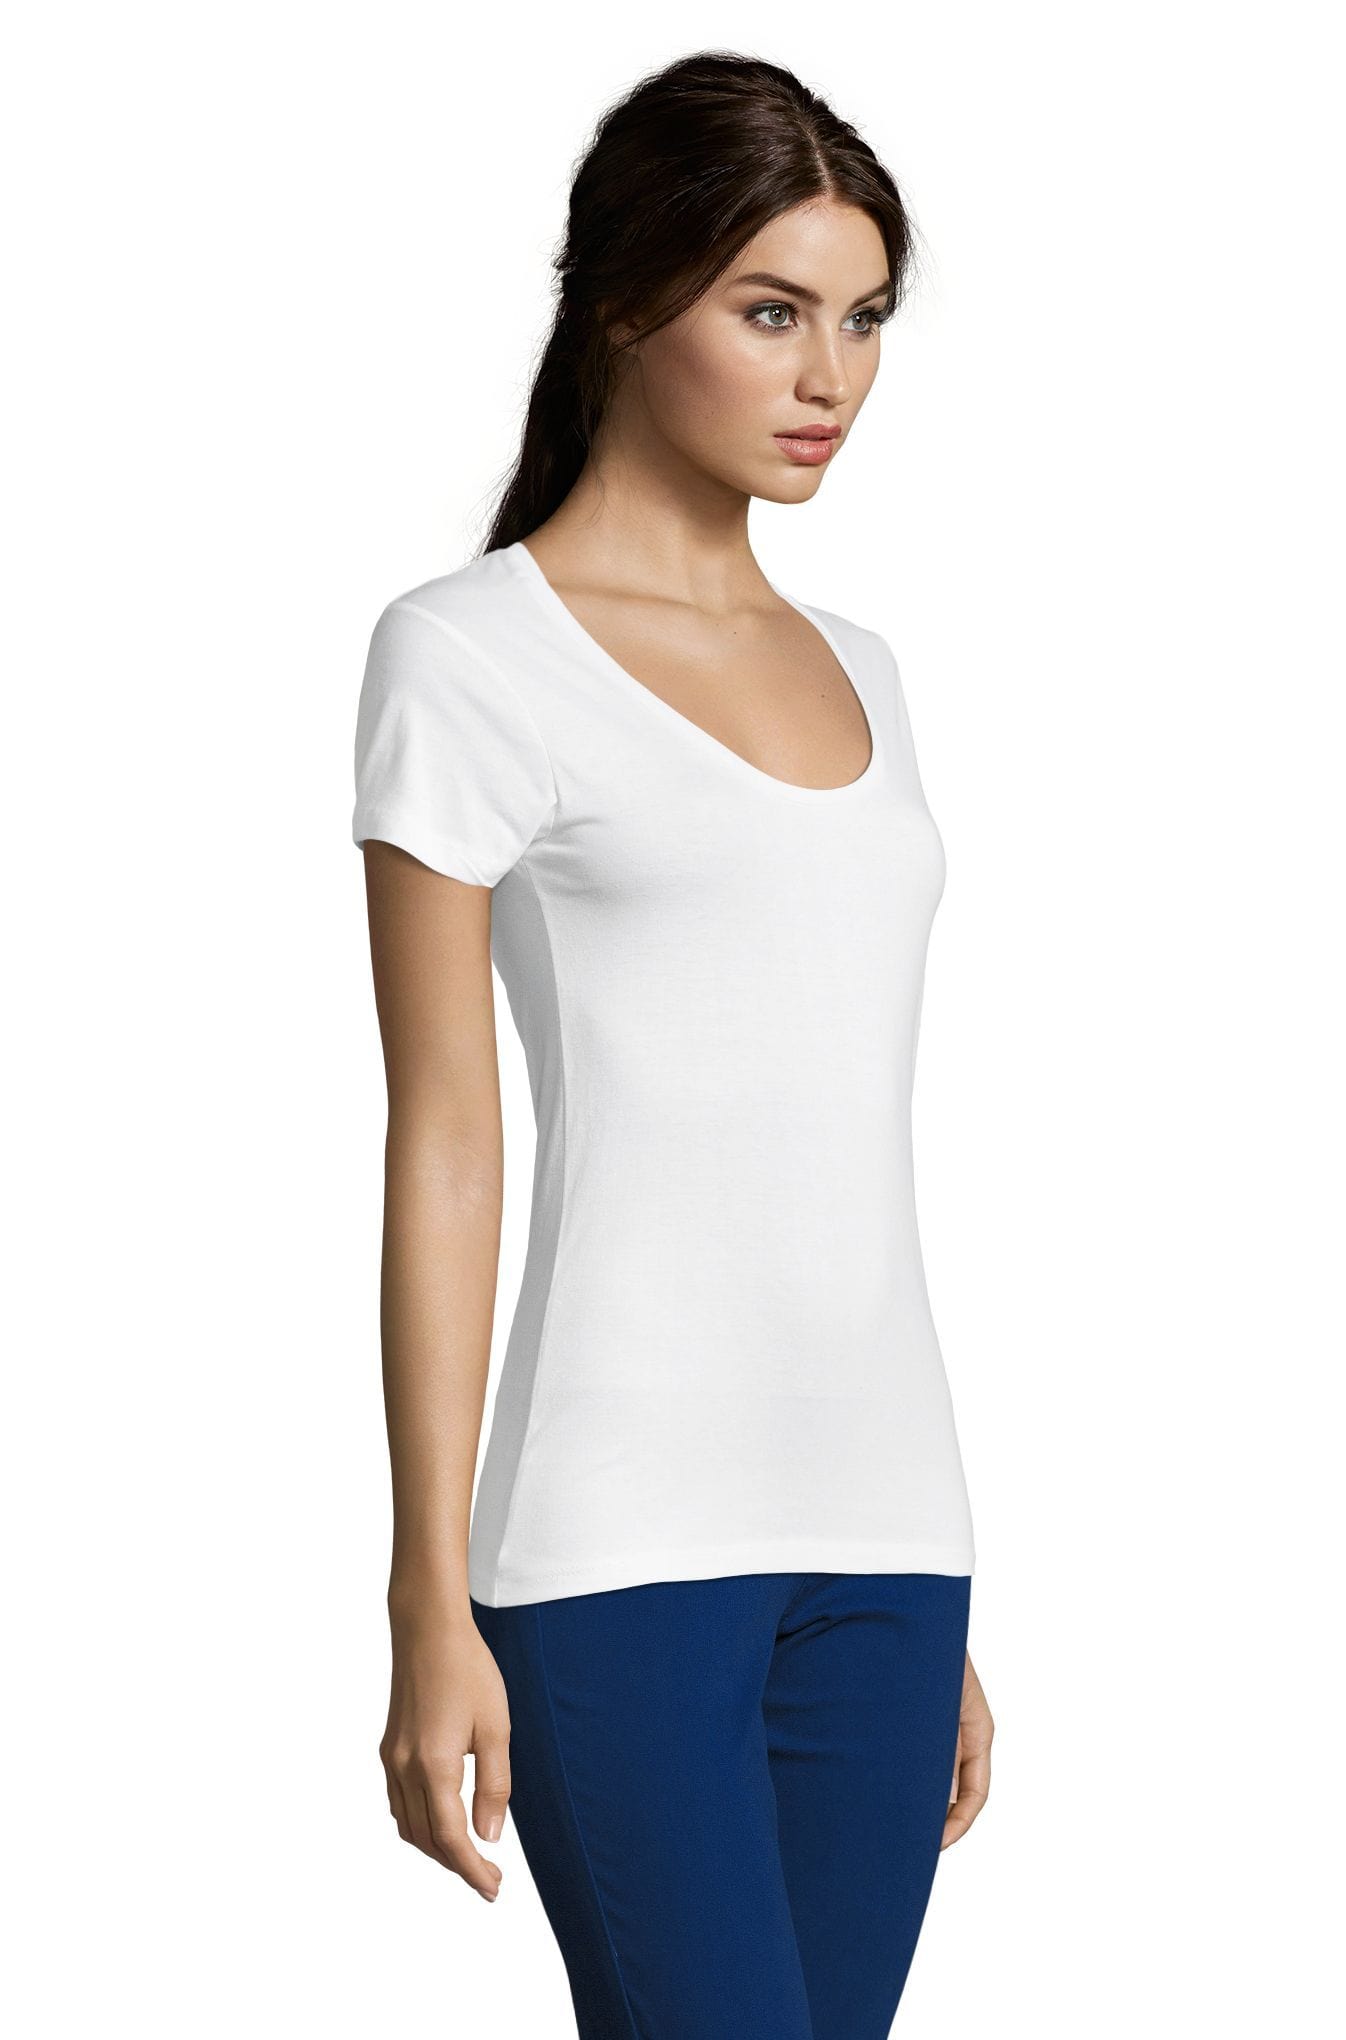 Simple Order Custom Women&#x27;s Scoop Neck T-shirt Your multicolor design on the t-shirt color of your choice (12 colors)